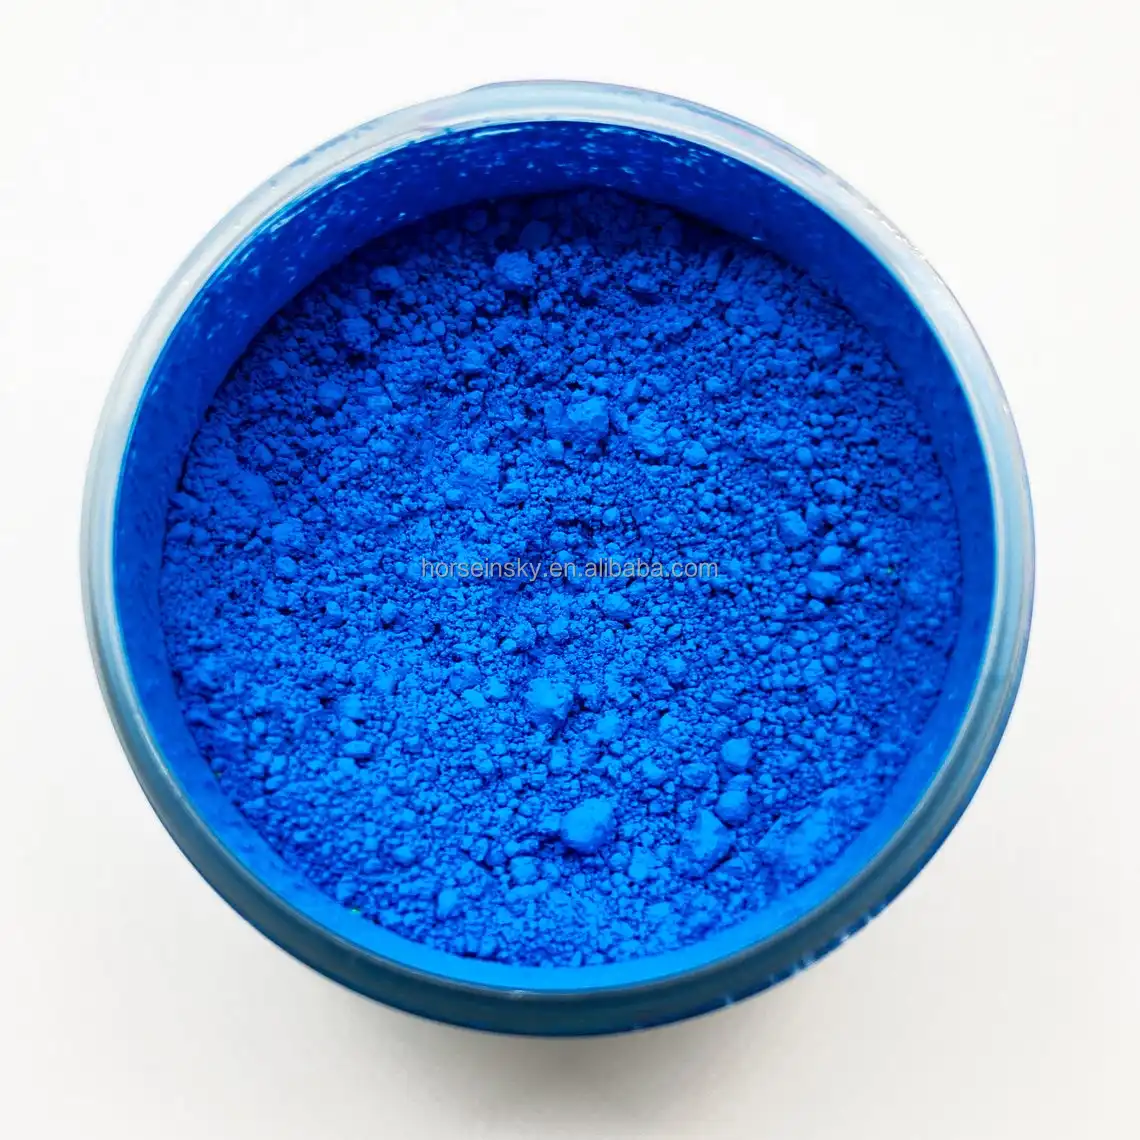 Widely used raw material Pigment blue powder / Phthalocyanine Blue BGS P.B.15:3 high grade Brilliant Blue